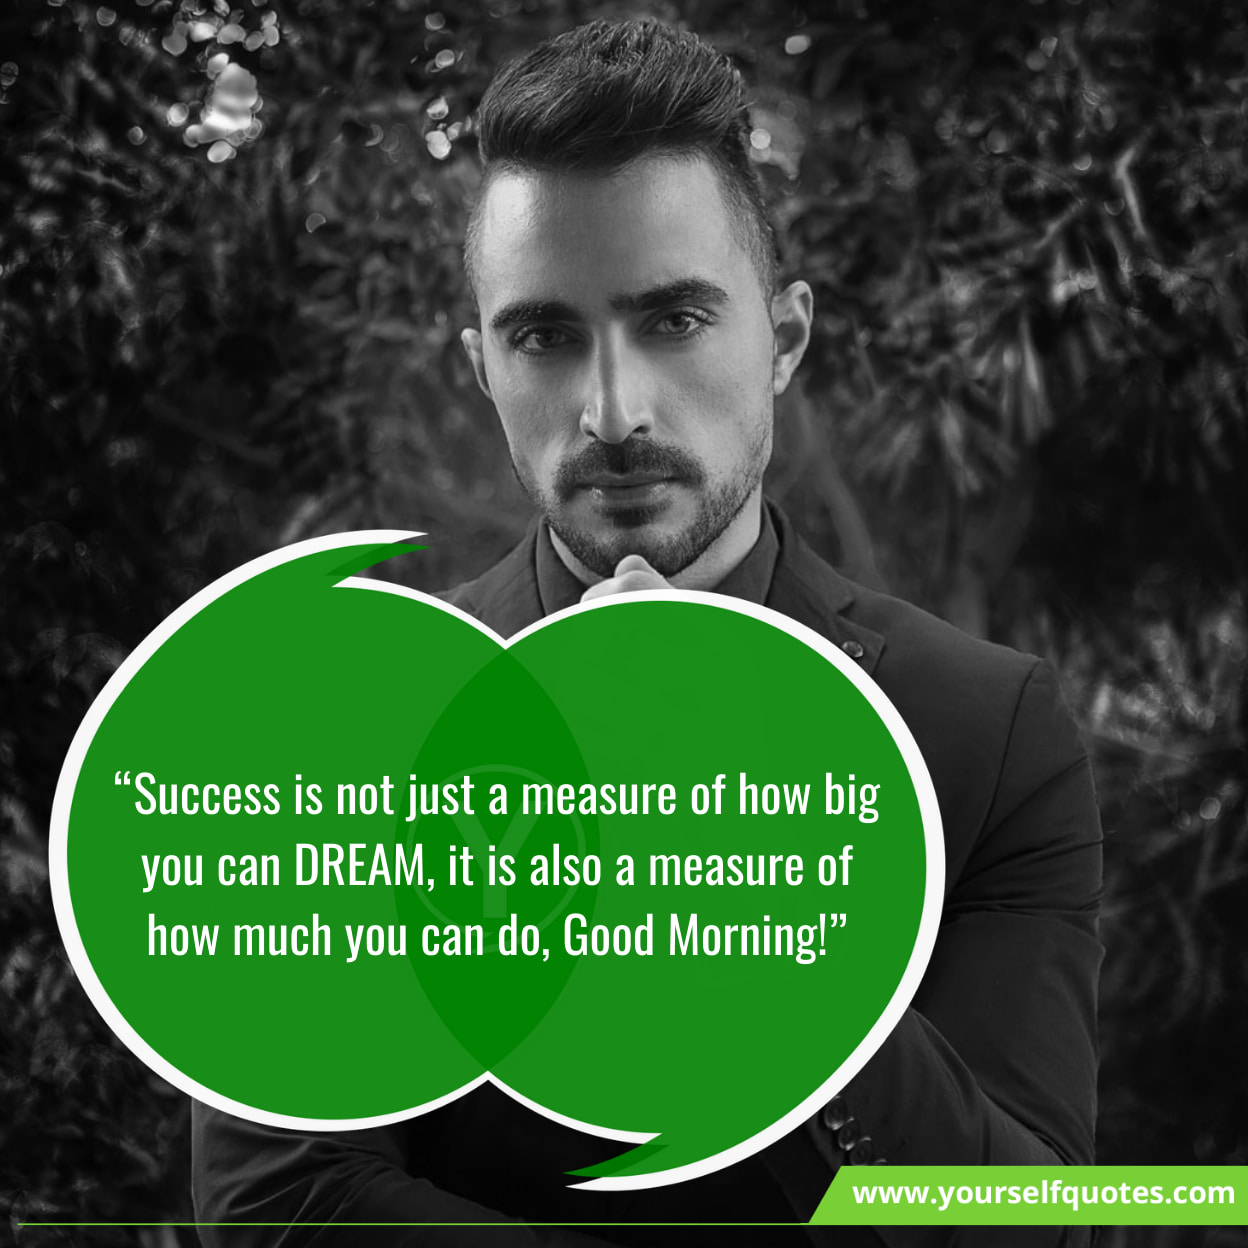 Morning Motivation Quotes On Success